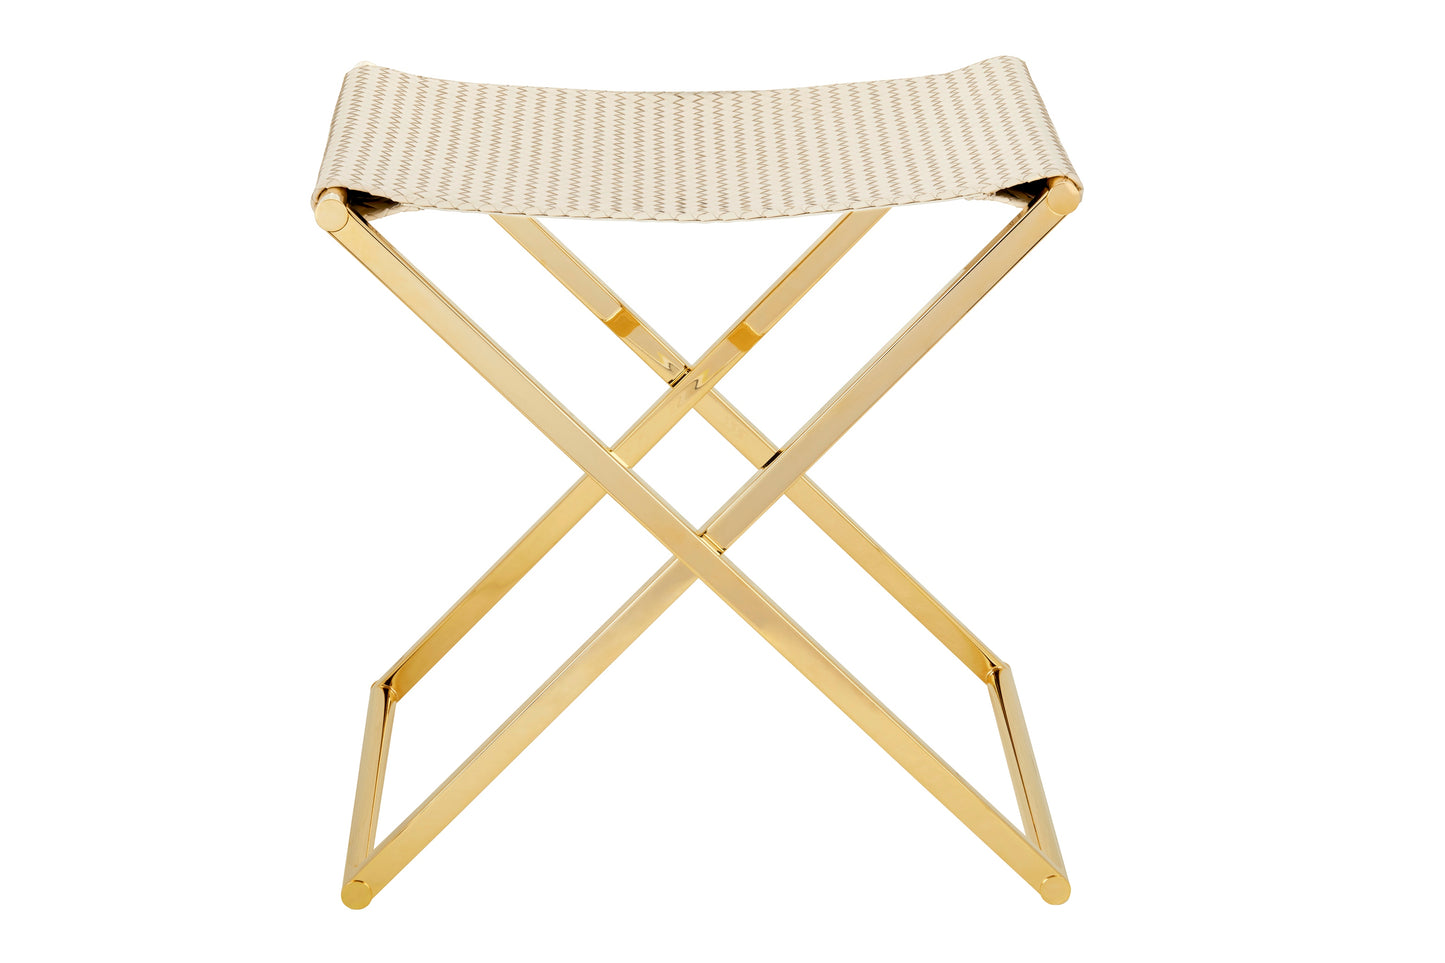 Ionio Folding Stool | Luggage Rack by Riviere | Folding stool | luggage rack with handwoven leather seat, chrome or gold metal legs. | Furniture and Luggage Accessories | 2Jour Concierge, your luxury lifestyle shop